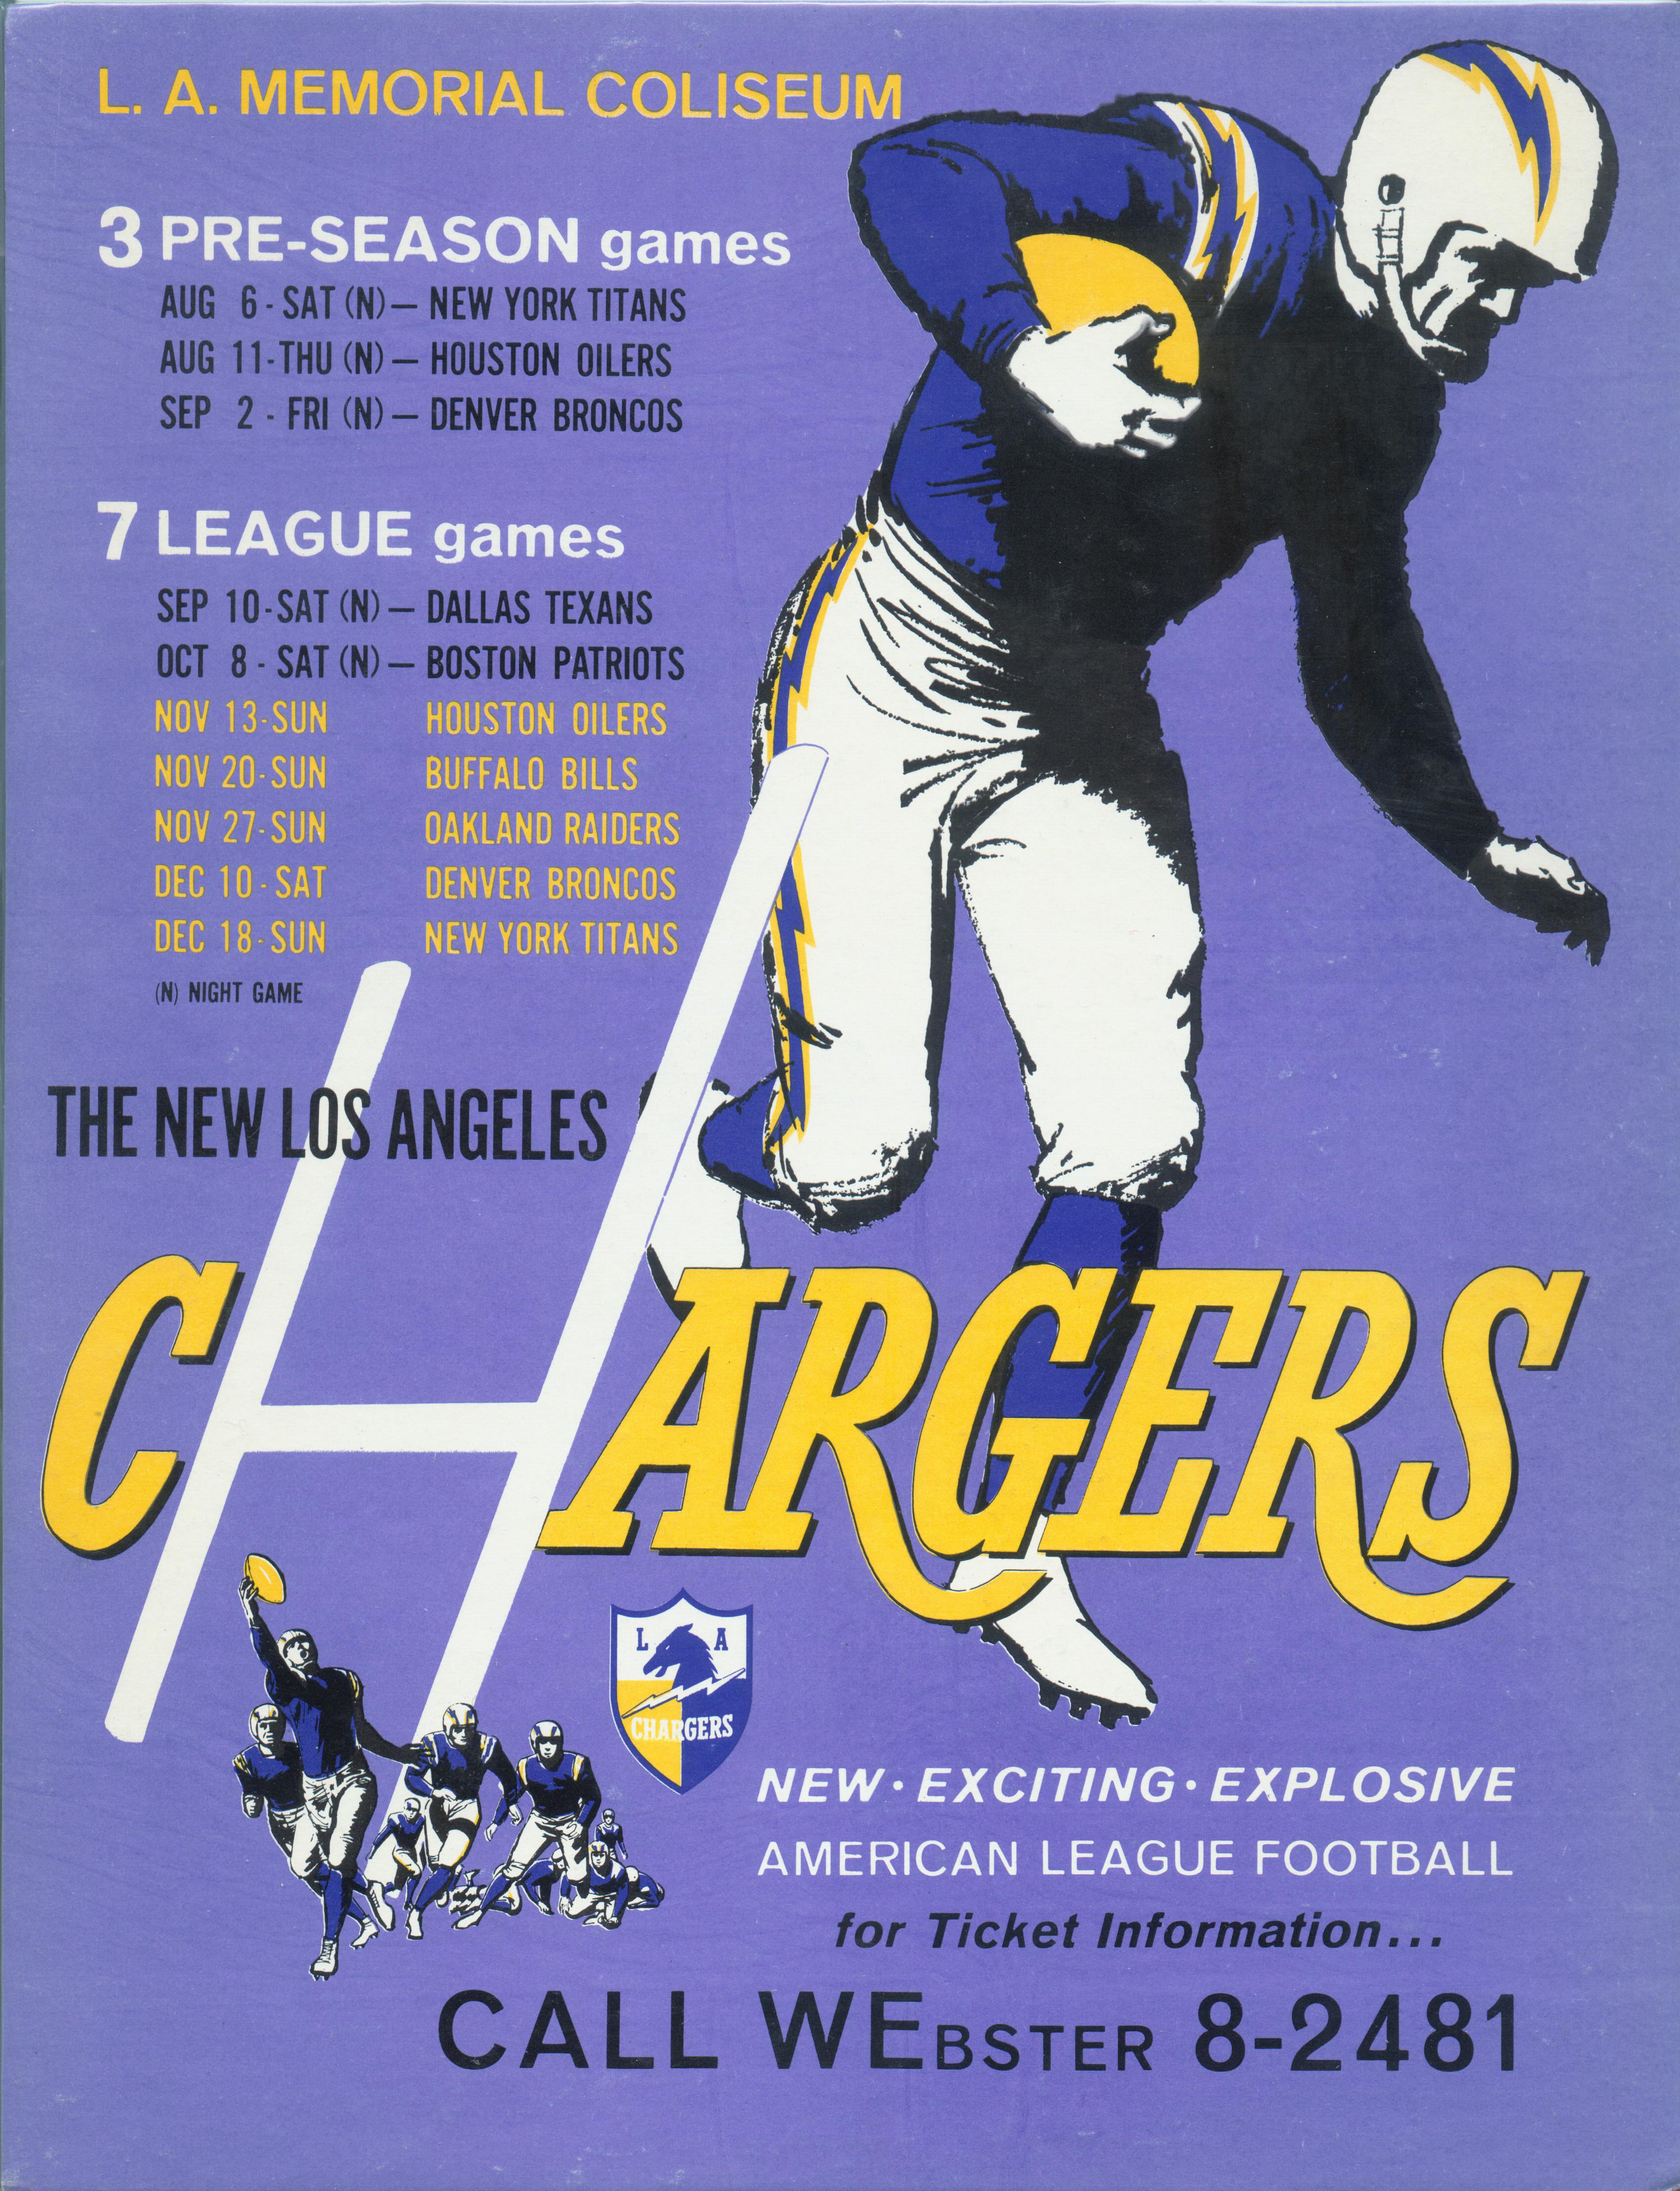 The Los Angeles Chargers – Tales from the AFL